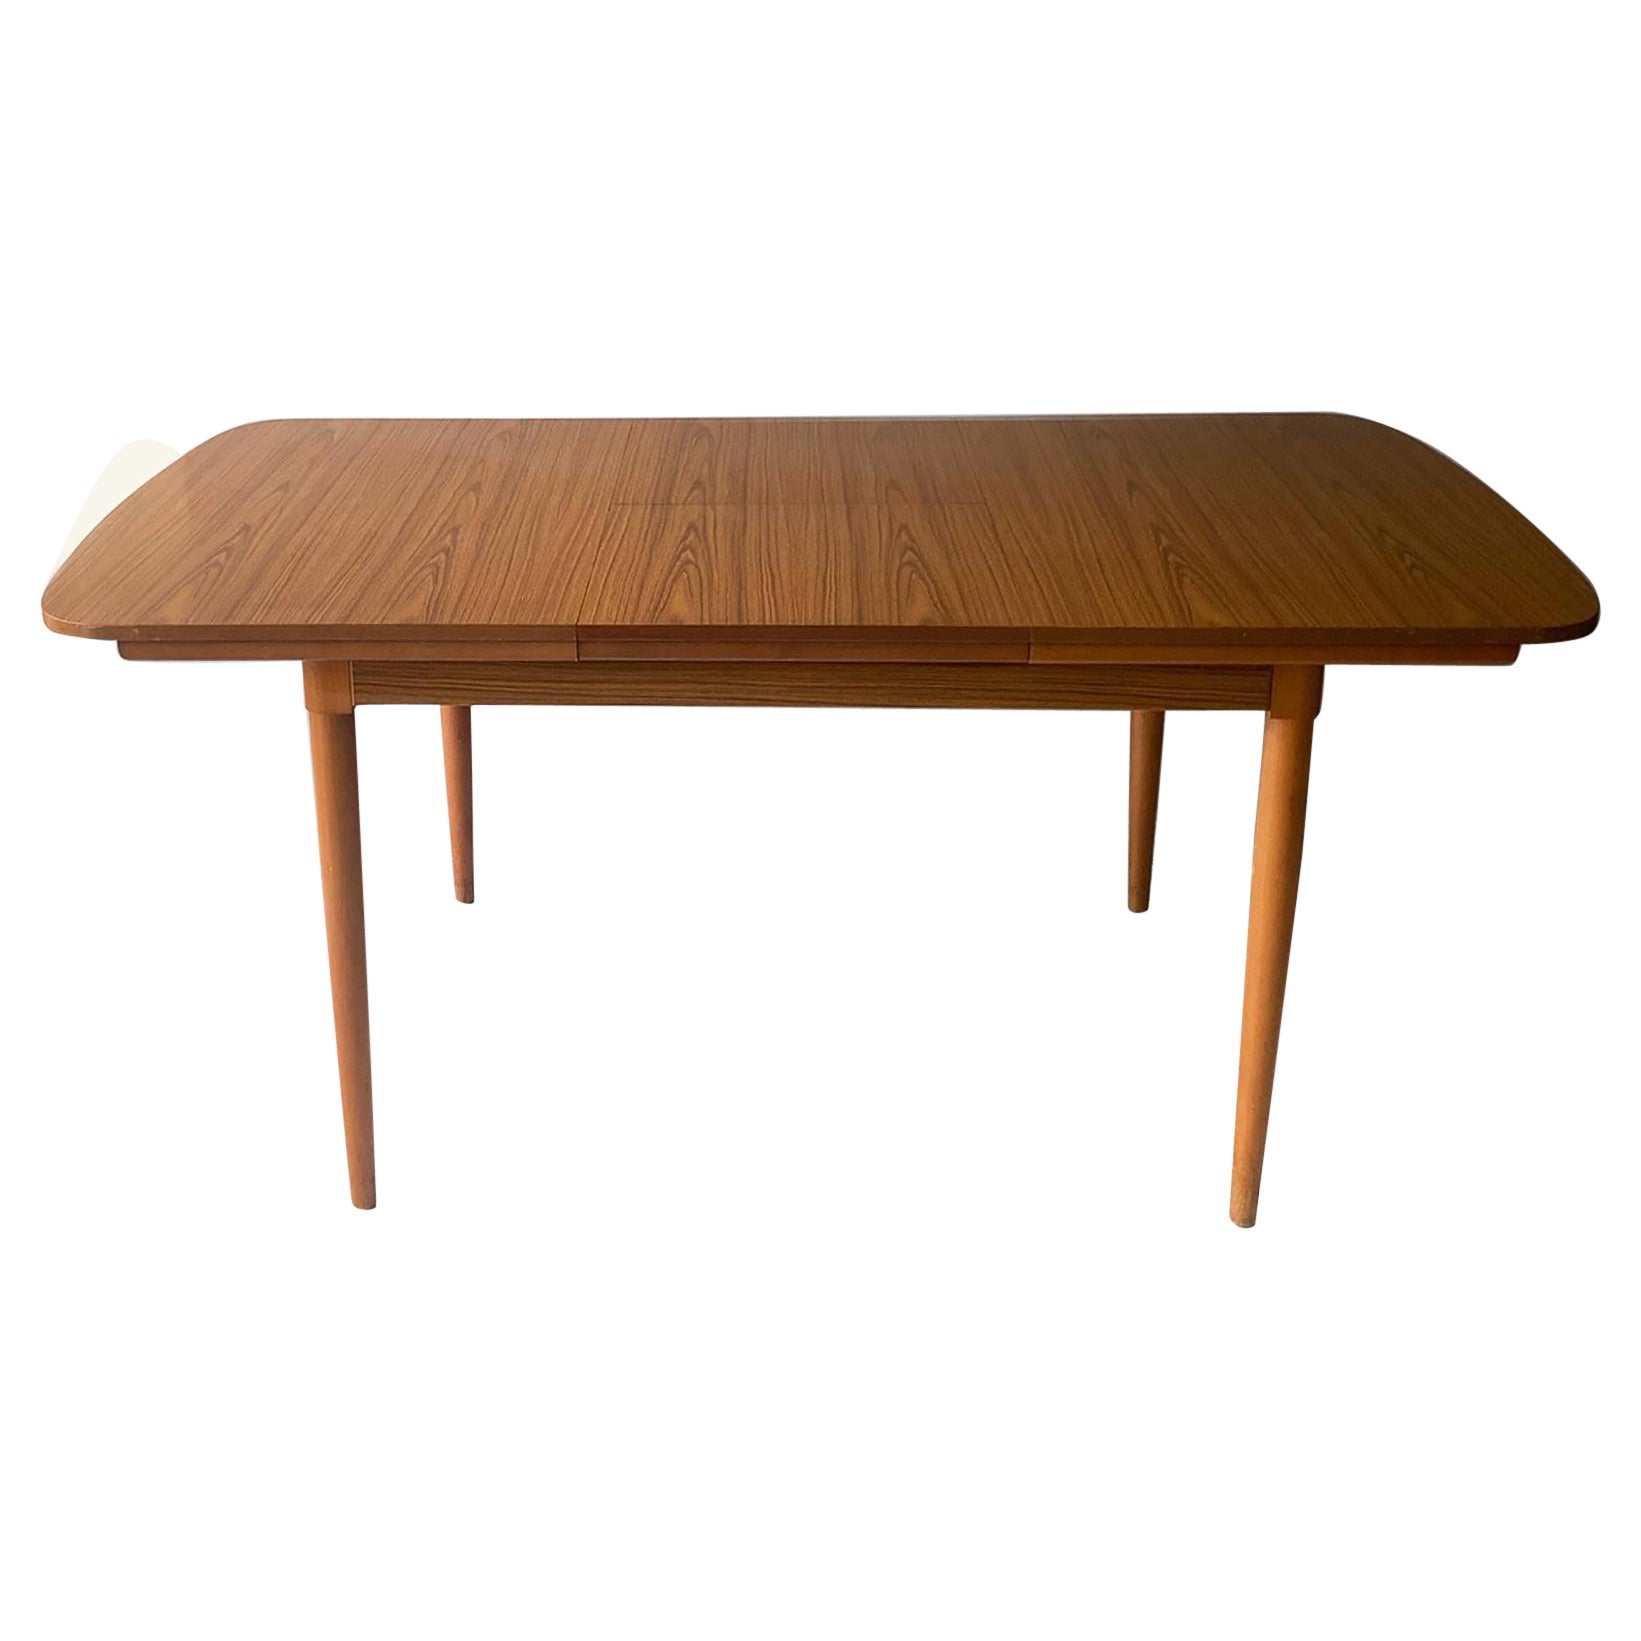 1970's mid century extending dining table by Schreiber Furniture im Angebot